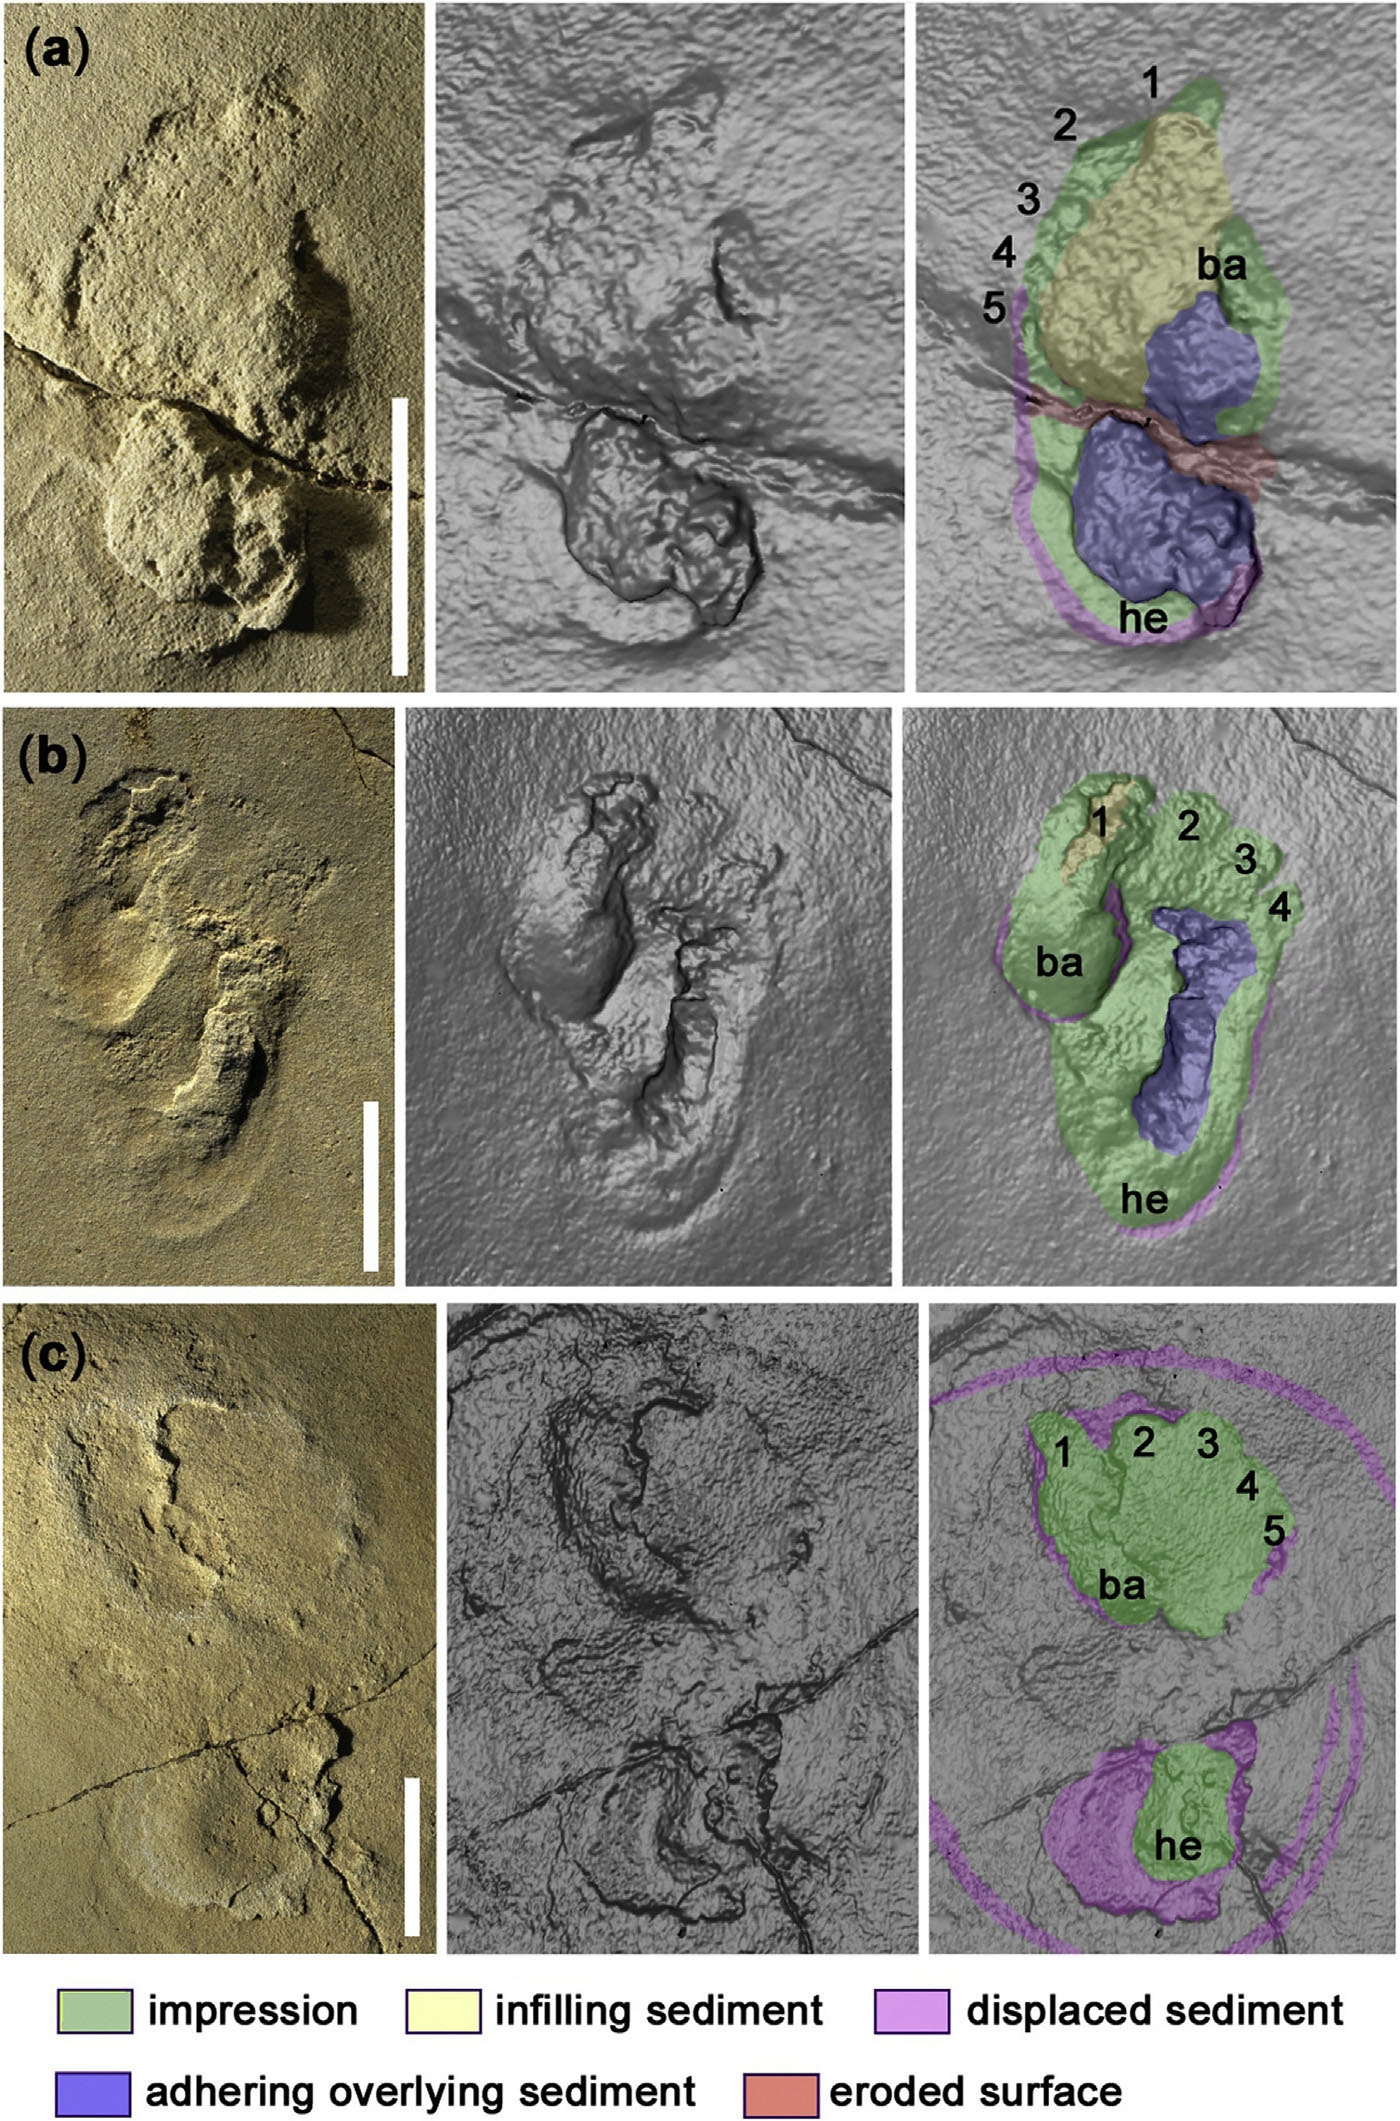 This figure from the scientific journal paper describing the tracks shows photographs, left, and laser scans, centre, of the three most well-preserved footprints. The images on the right label the ball (ba), heel (he) and five toes (numbered). (Gierlinski et. al./Proceedings of the Geologists’ Association)